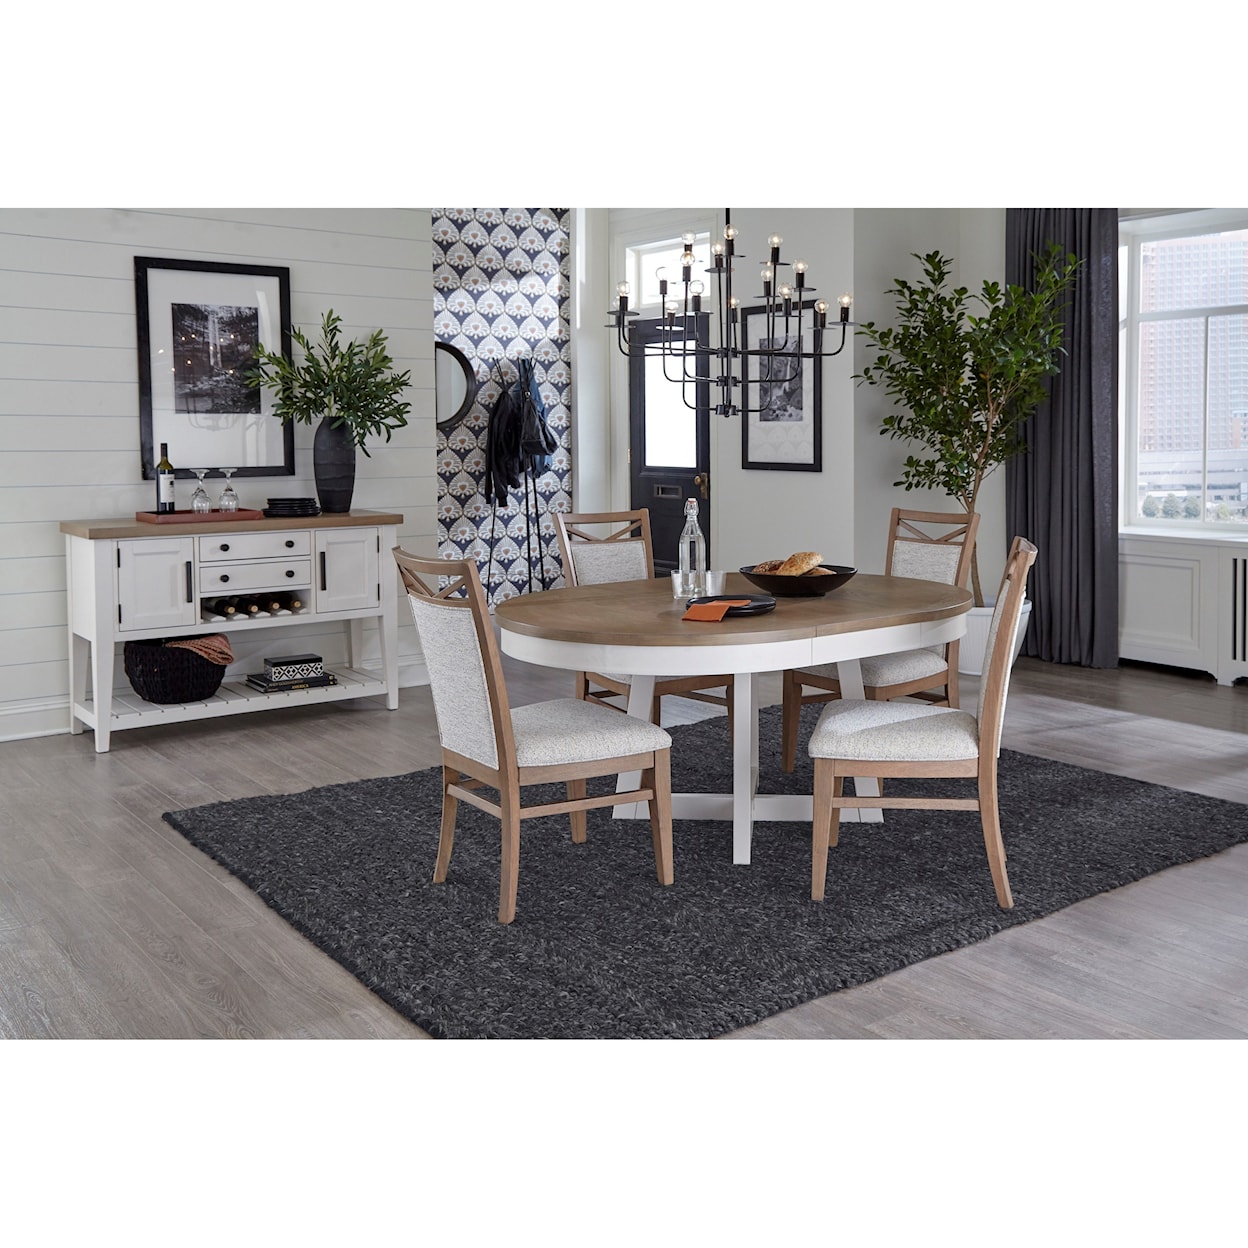 Paramount Furniture Americana Modern Dining Chair Upholstered